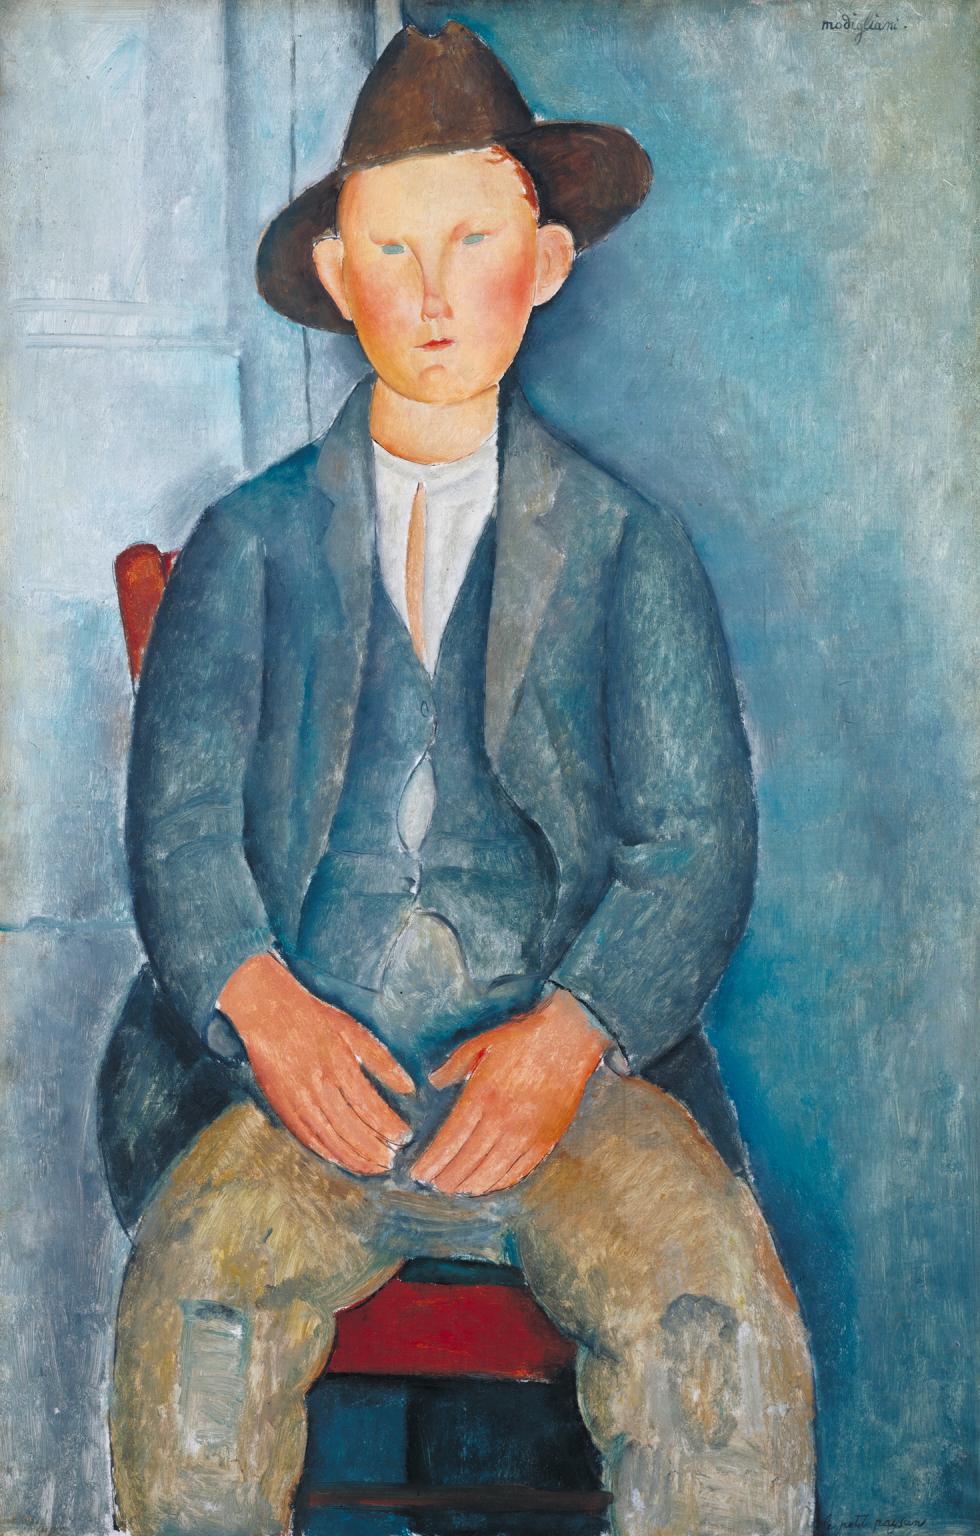 Inspiration: “The Little Peasant,” by Amedeo Modigliani